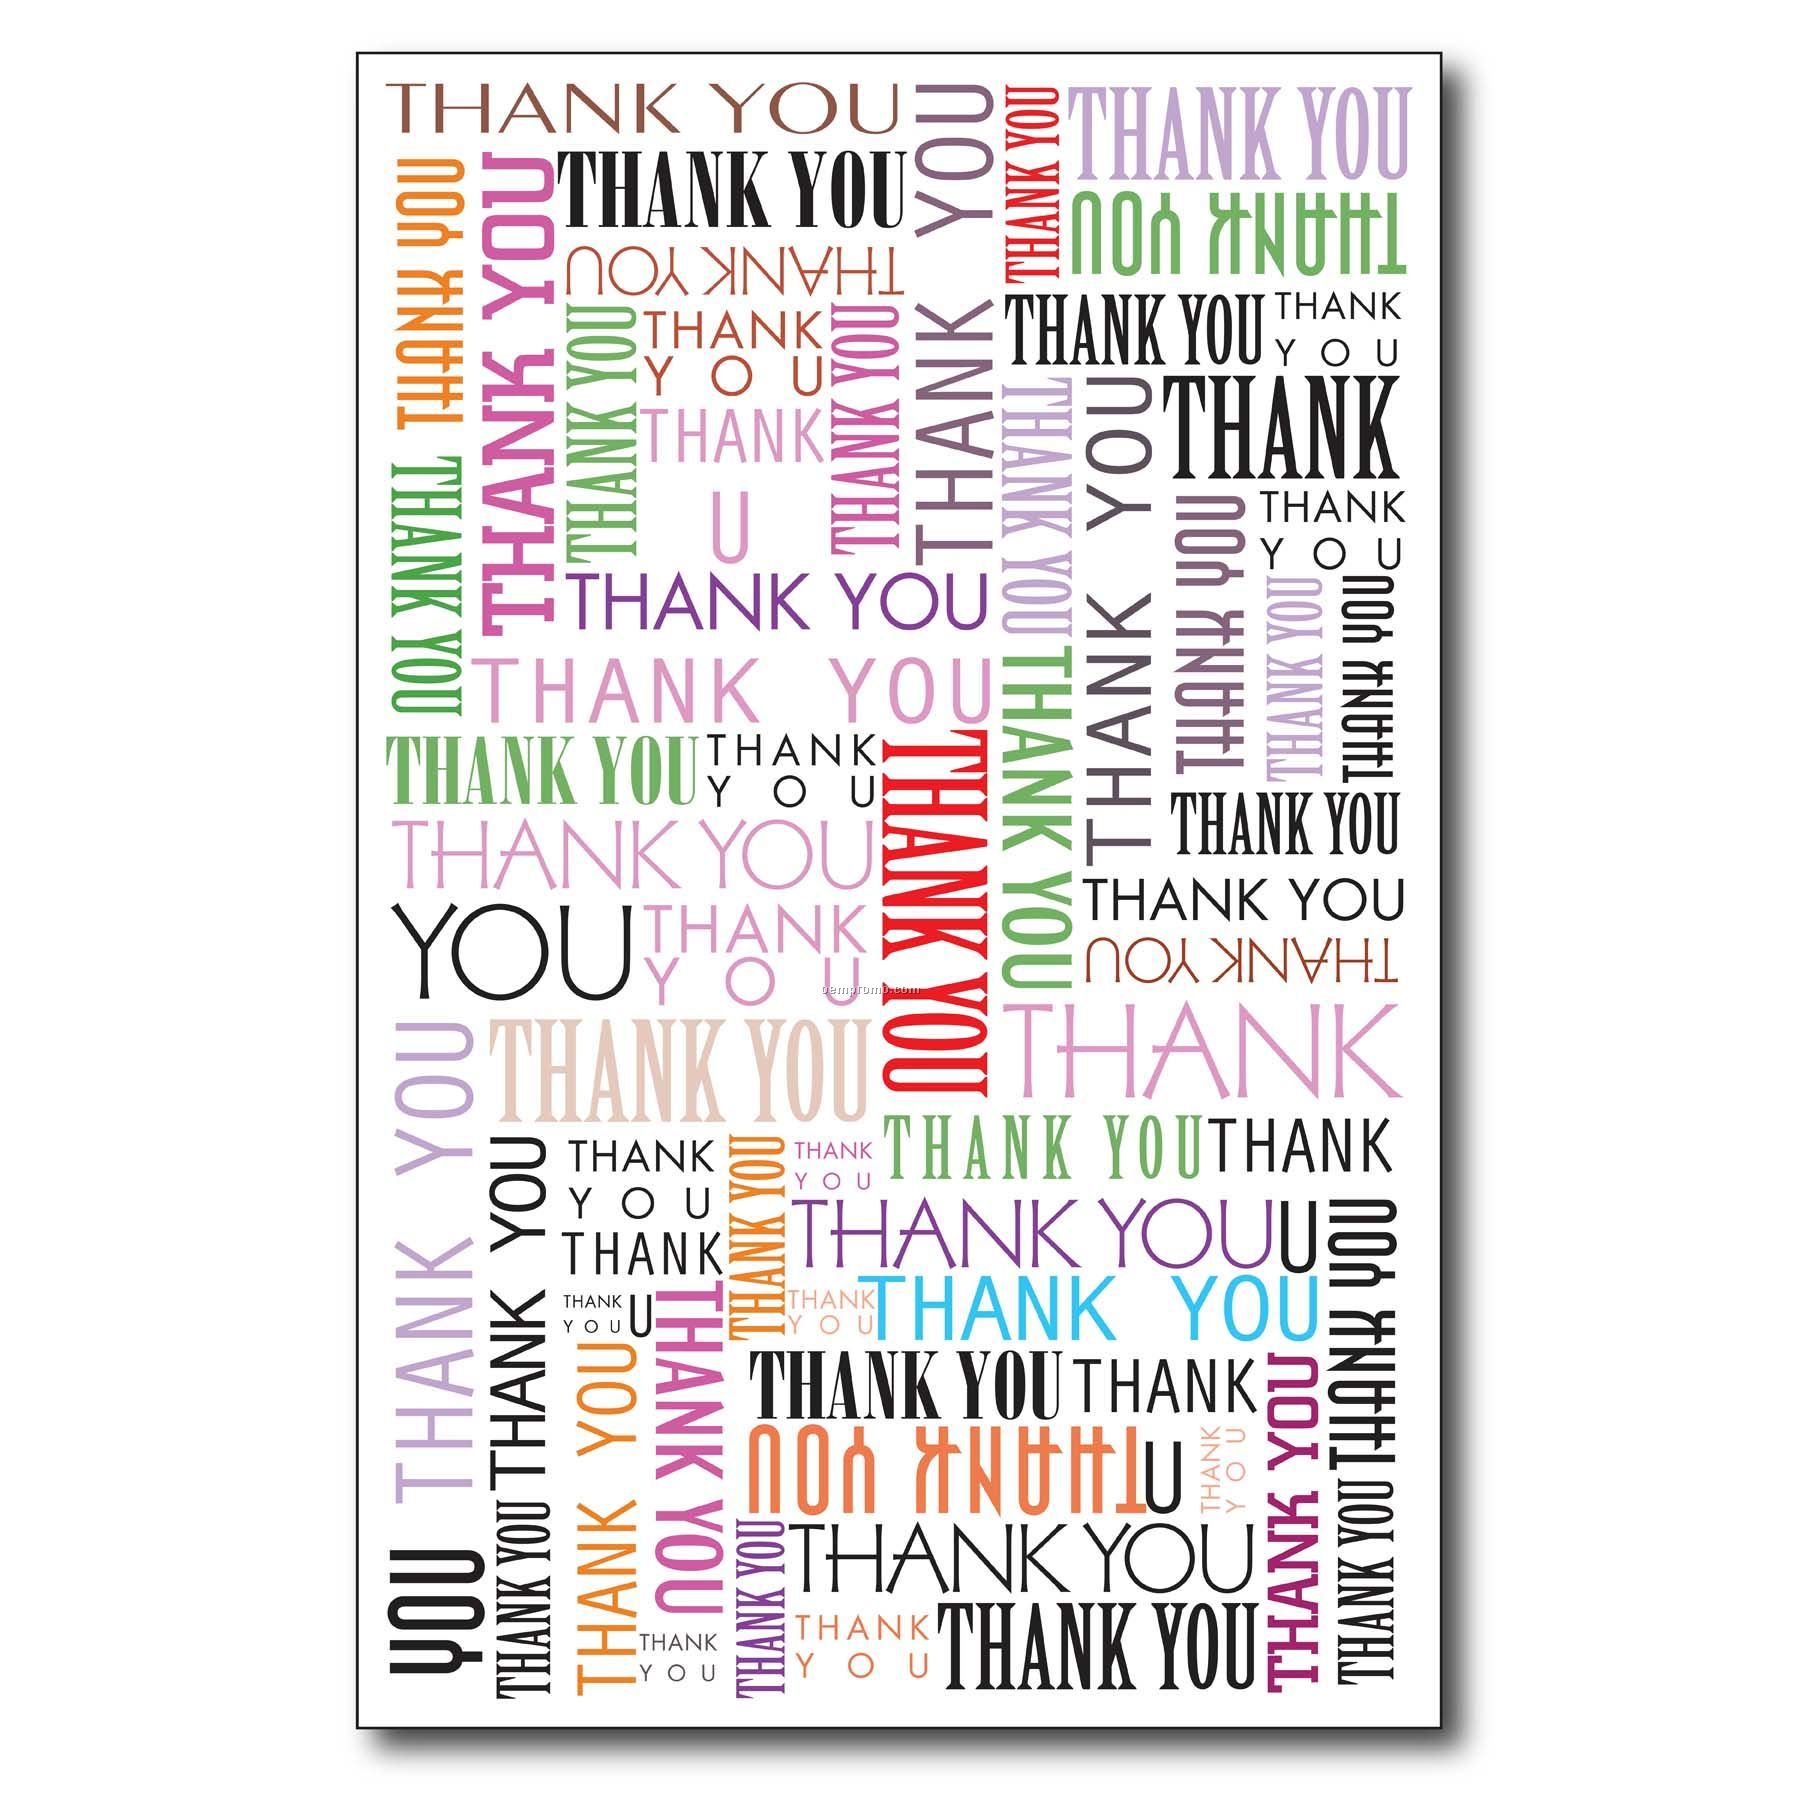 Thank You- Greeting Card